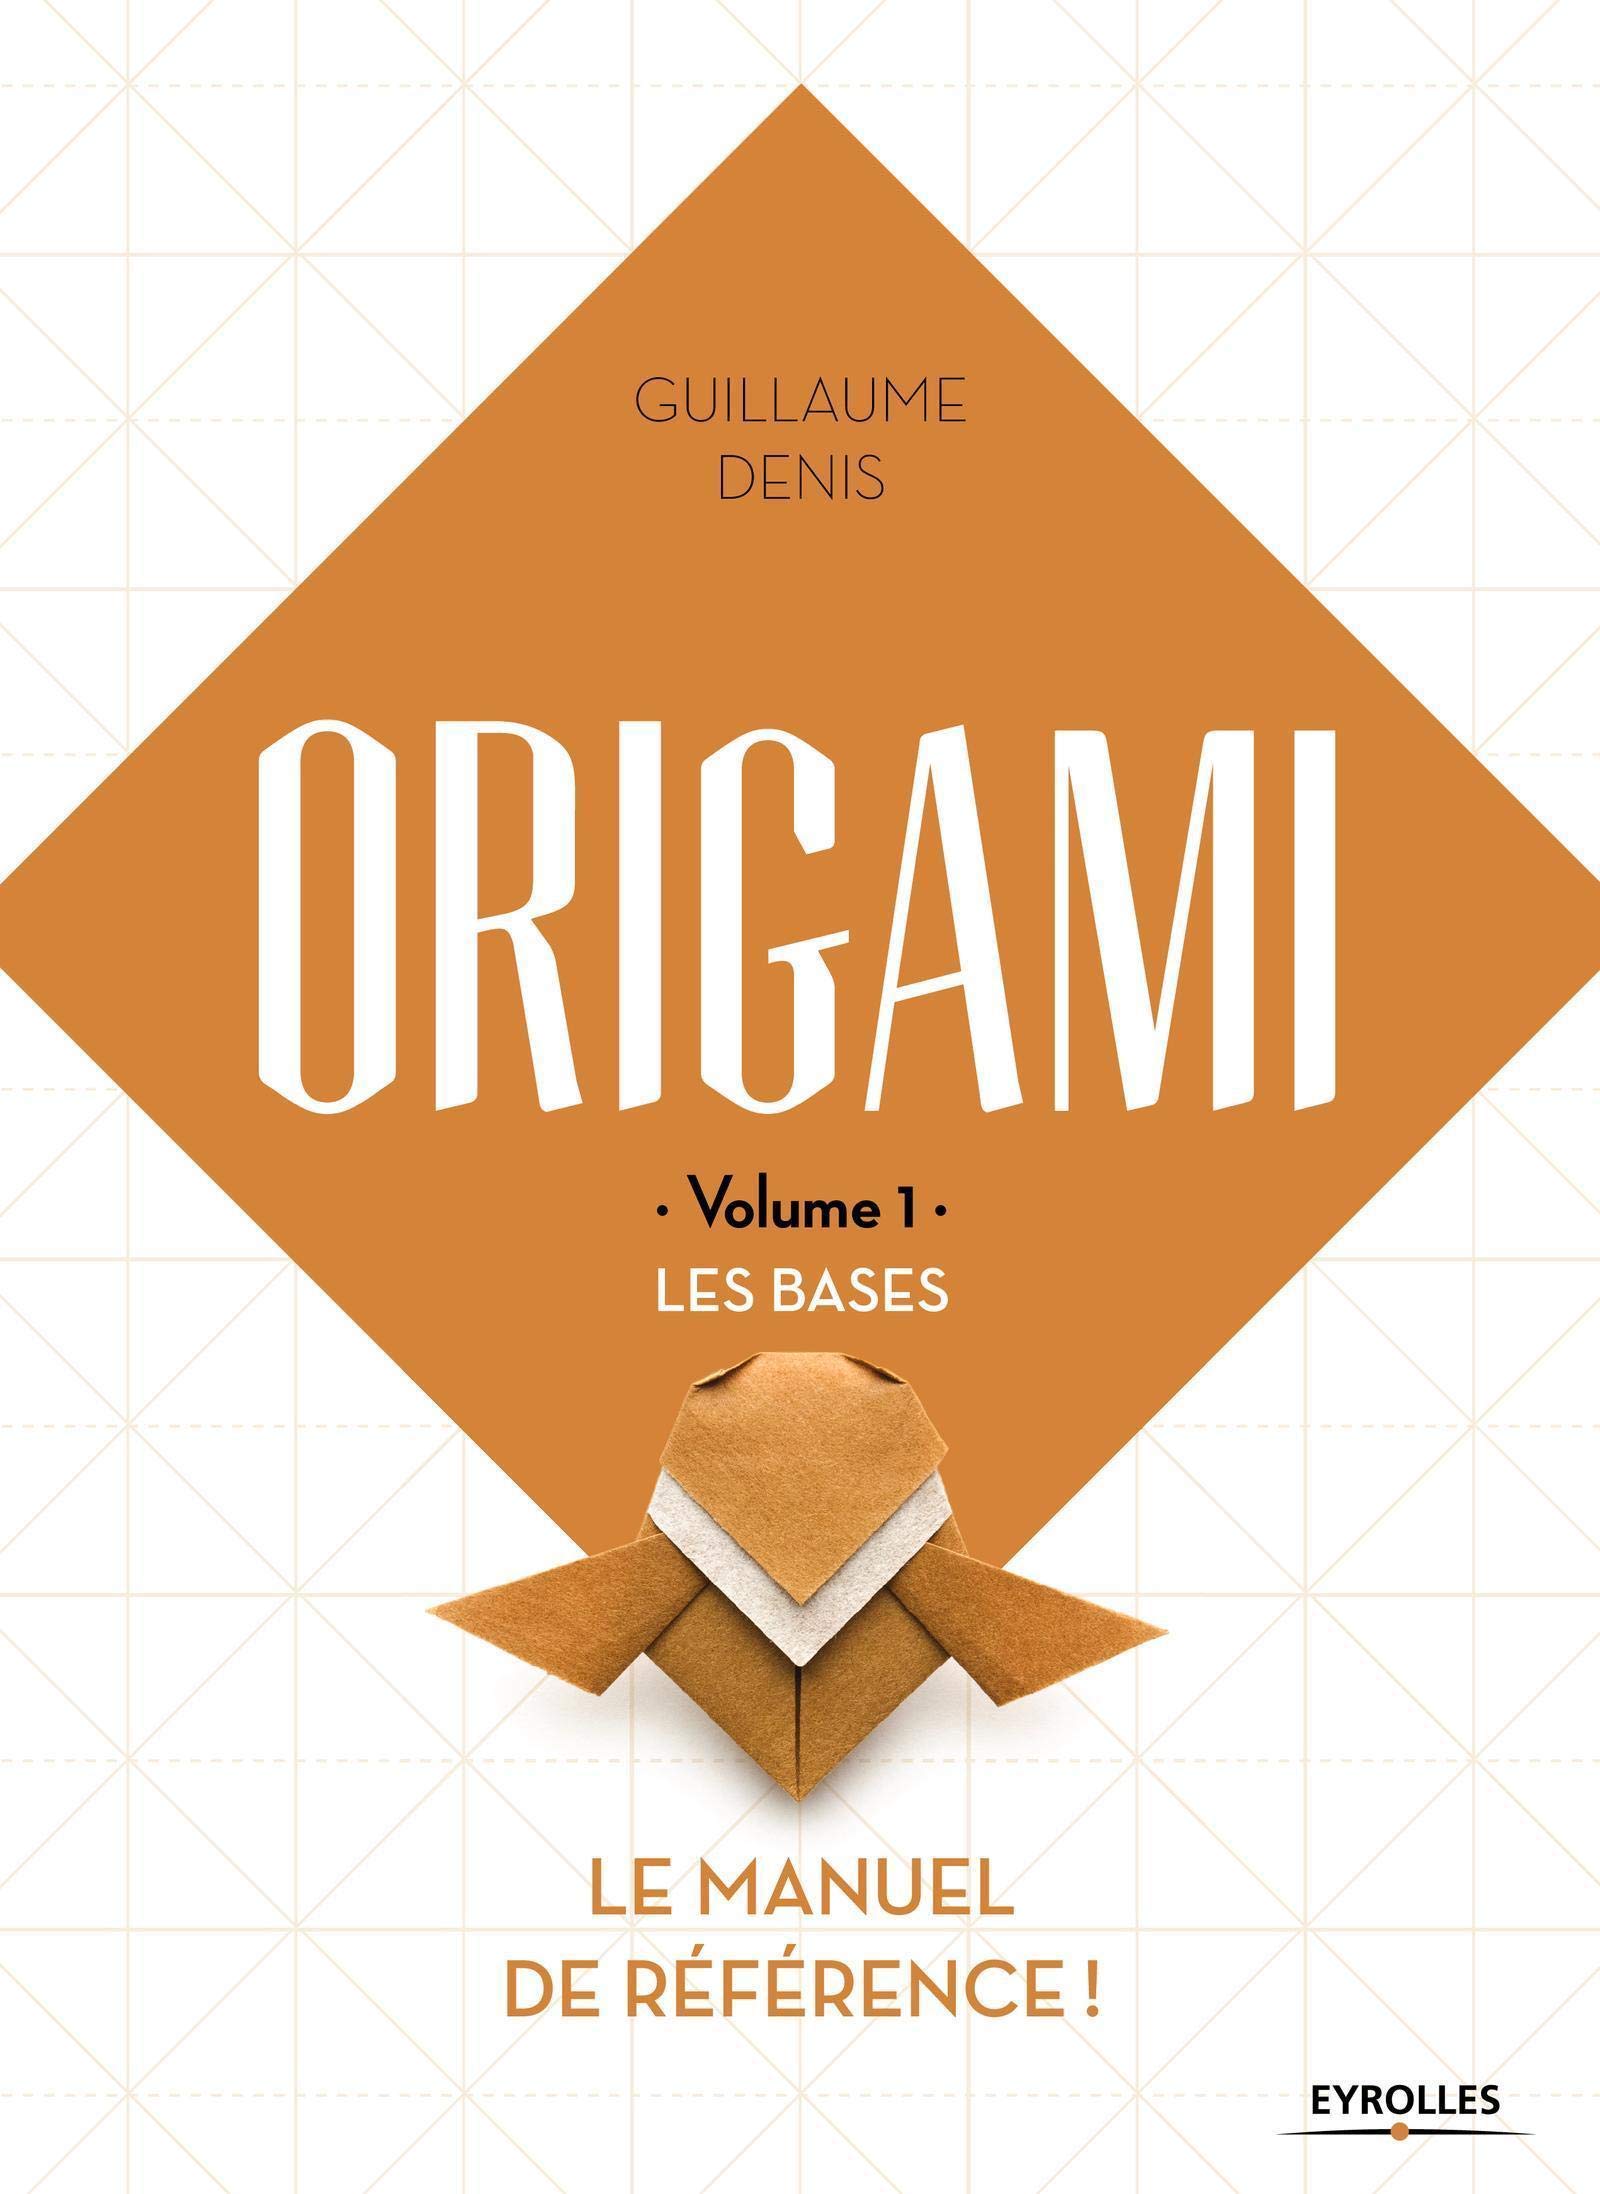 ORIGAMI - Volume 1 - LES BASES : page 209.